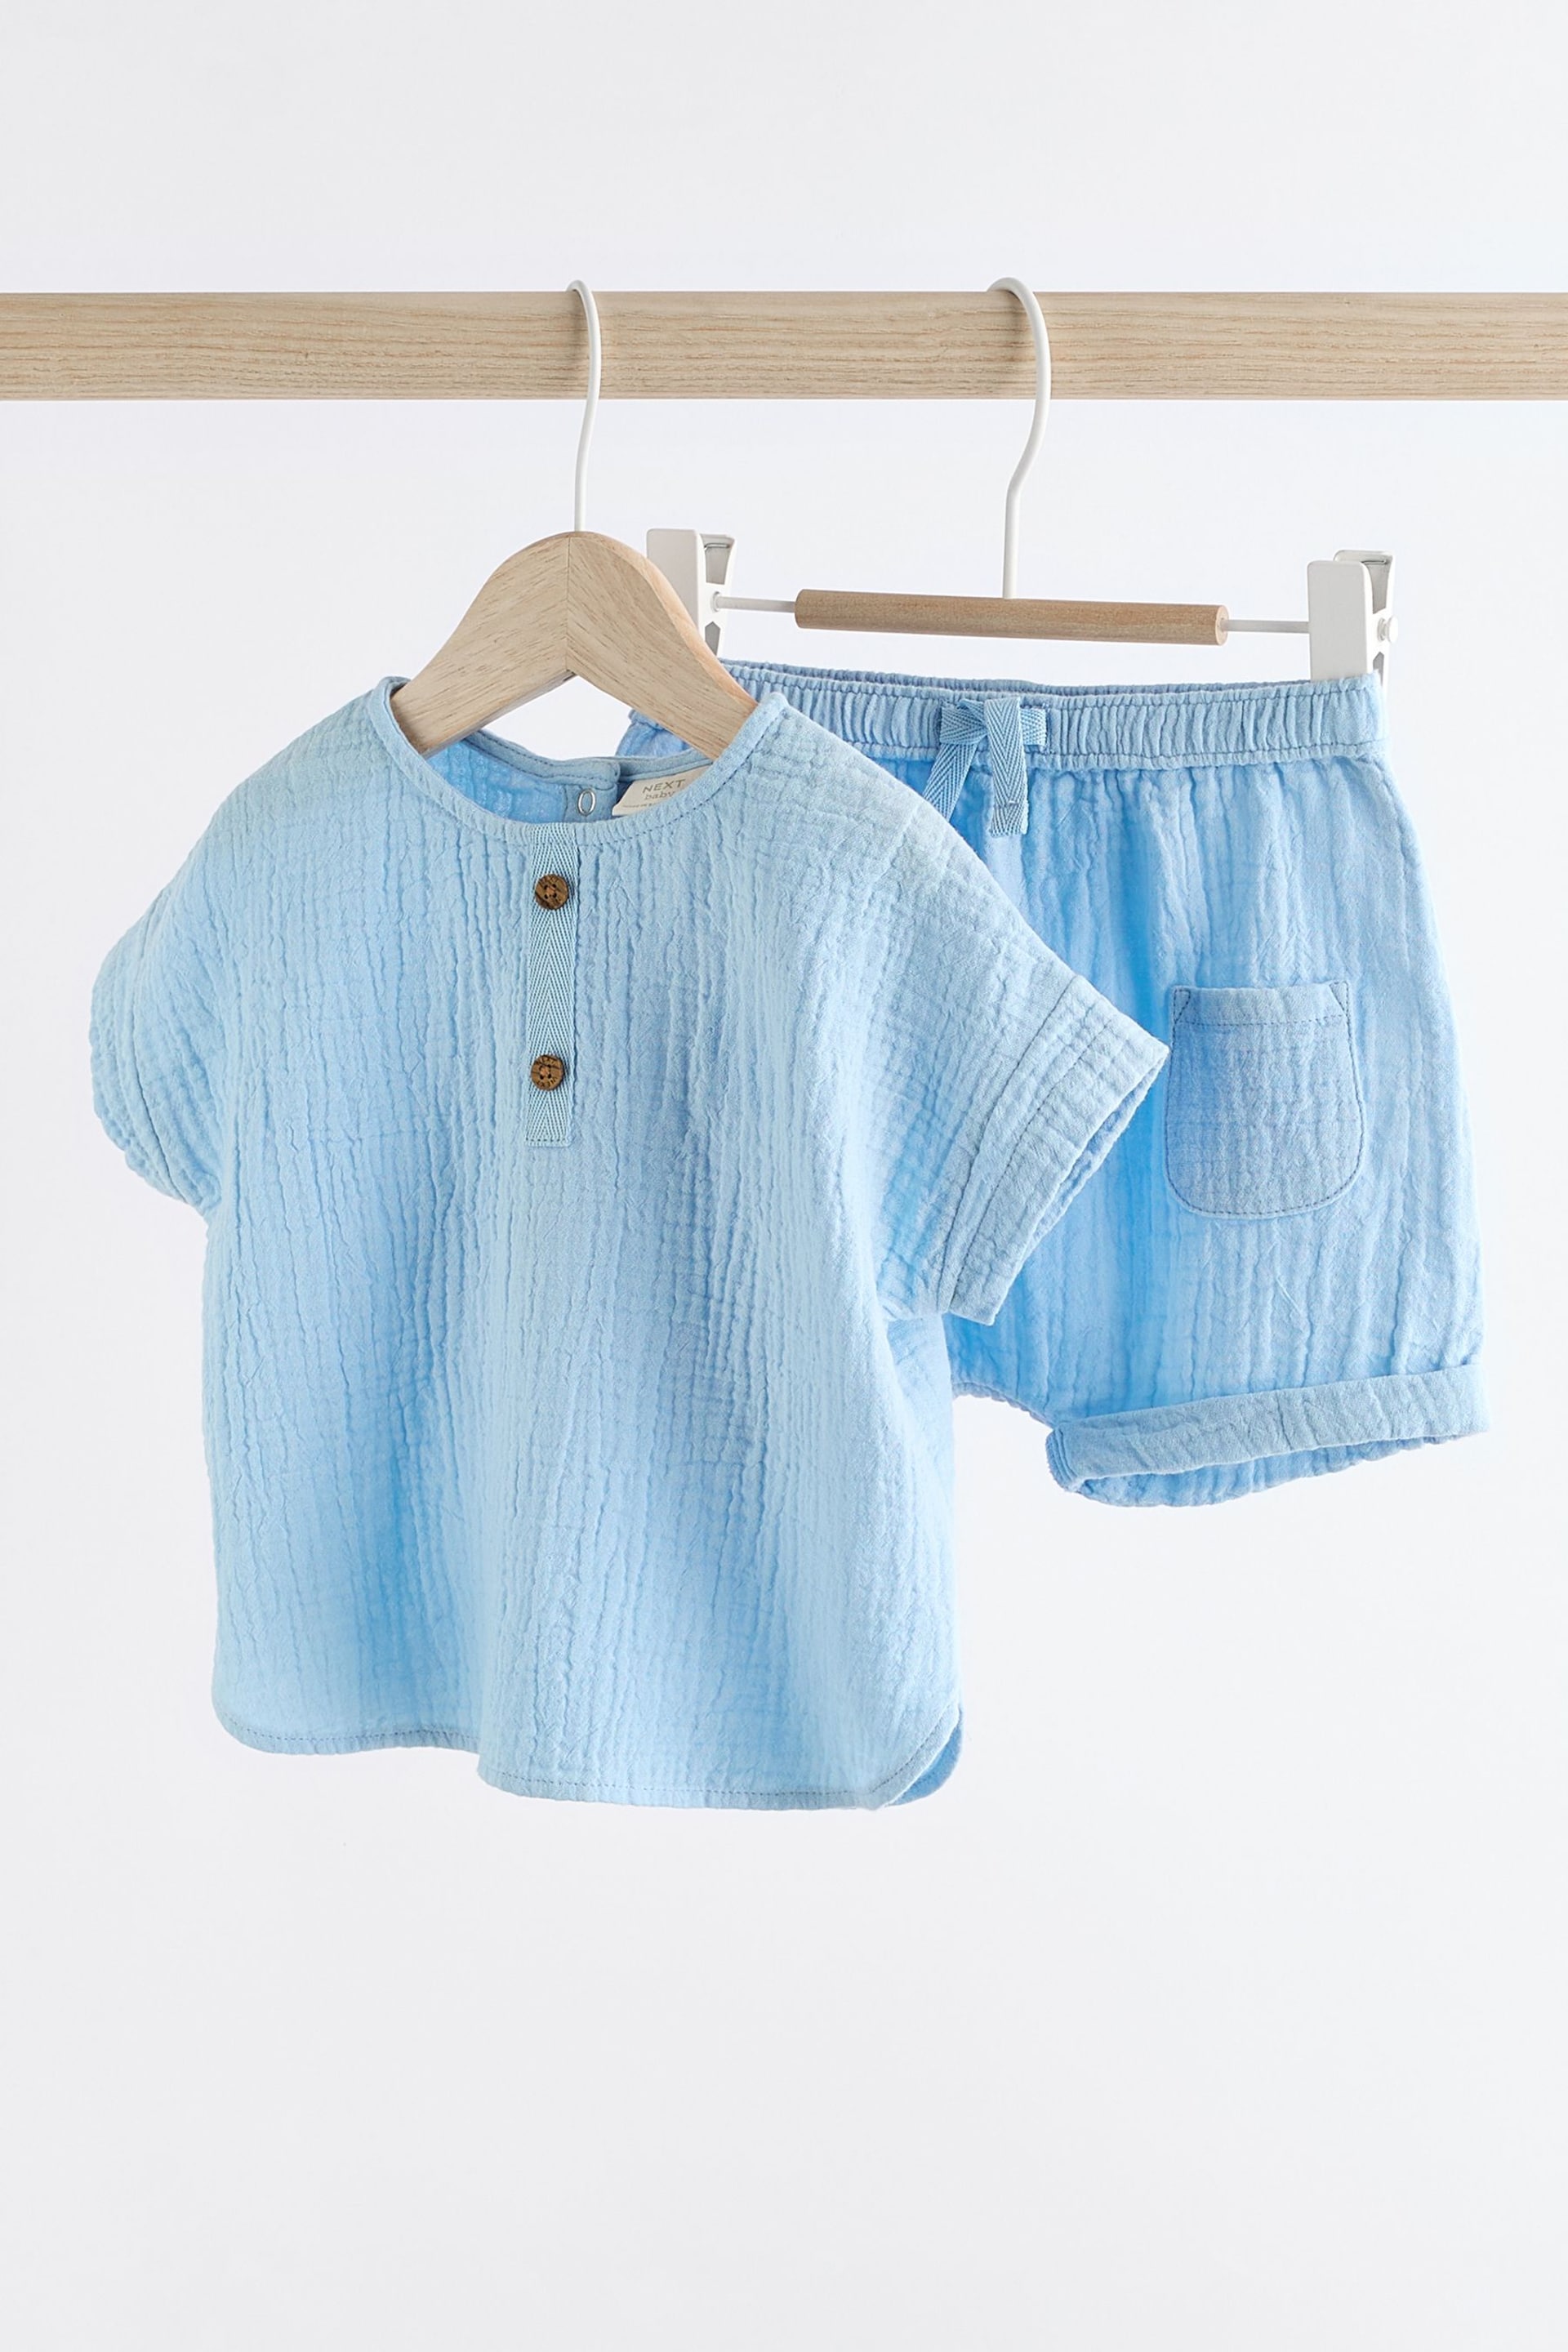 Blue Baby Top And Shorts Set (0mths-3yrs) - Image 1 of 9